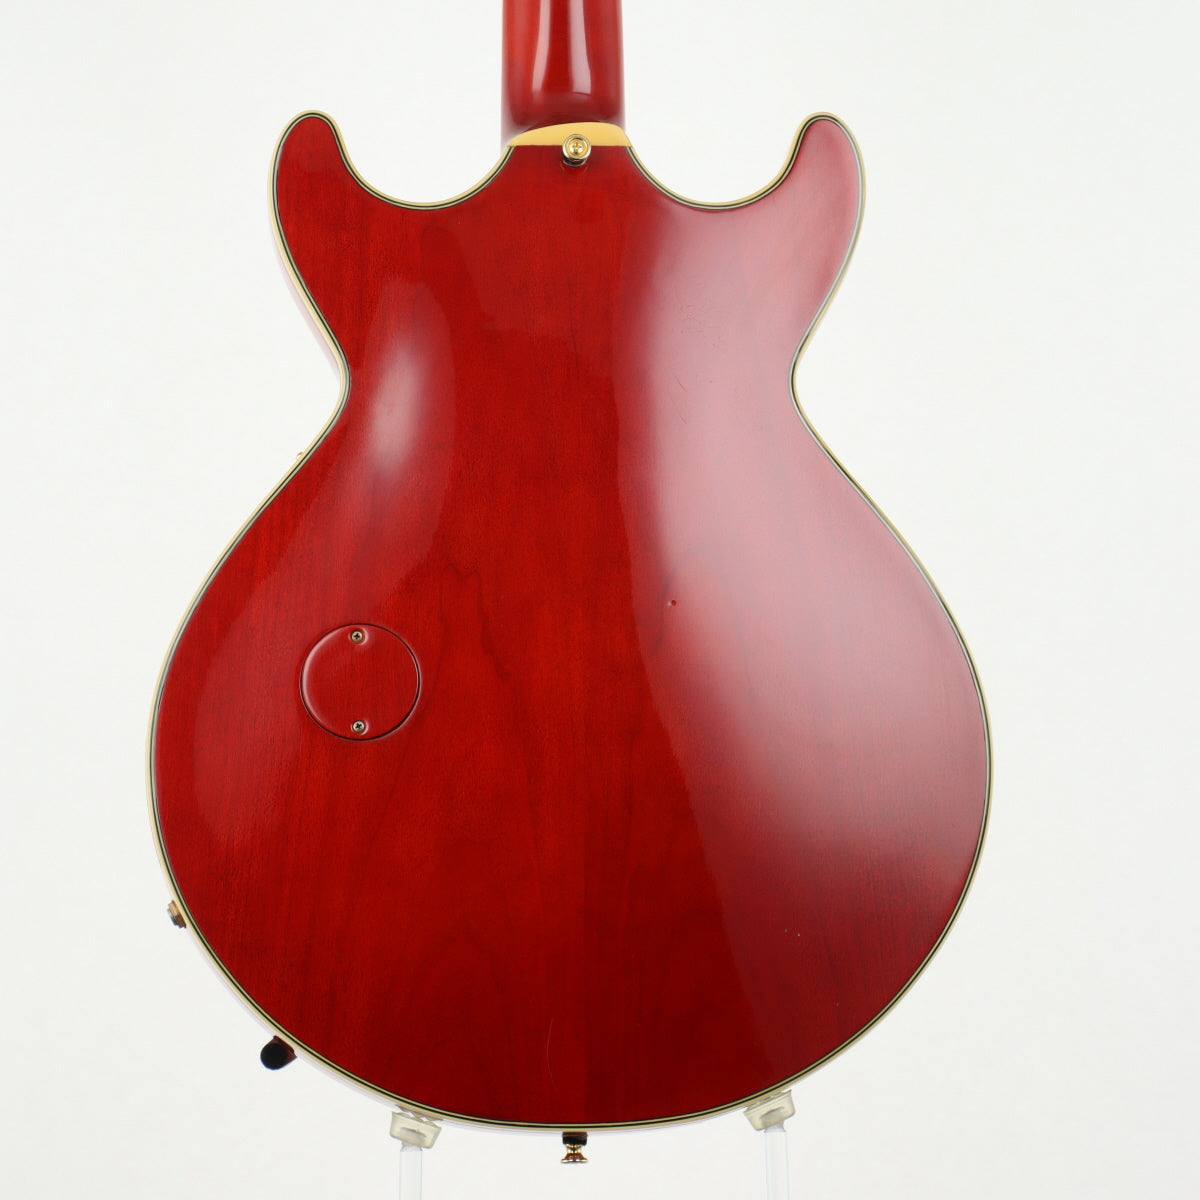 USED Argus / 1980's TJ-18 MOD Carrot Red [11]